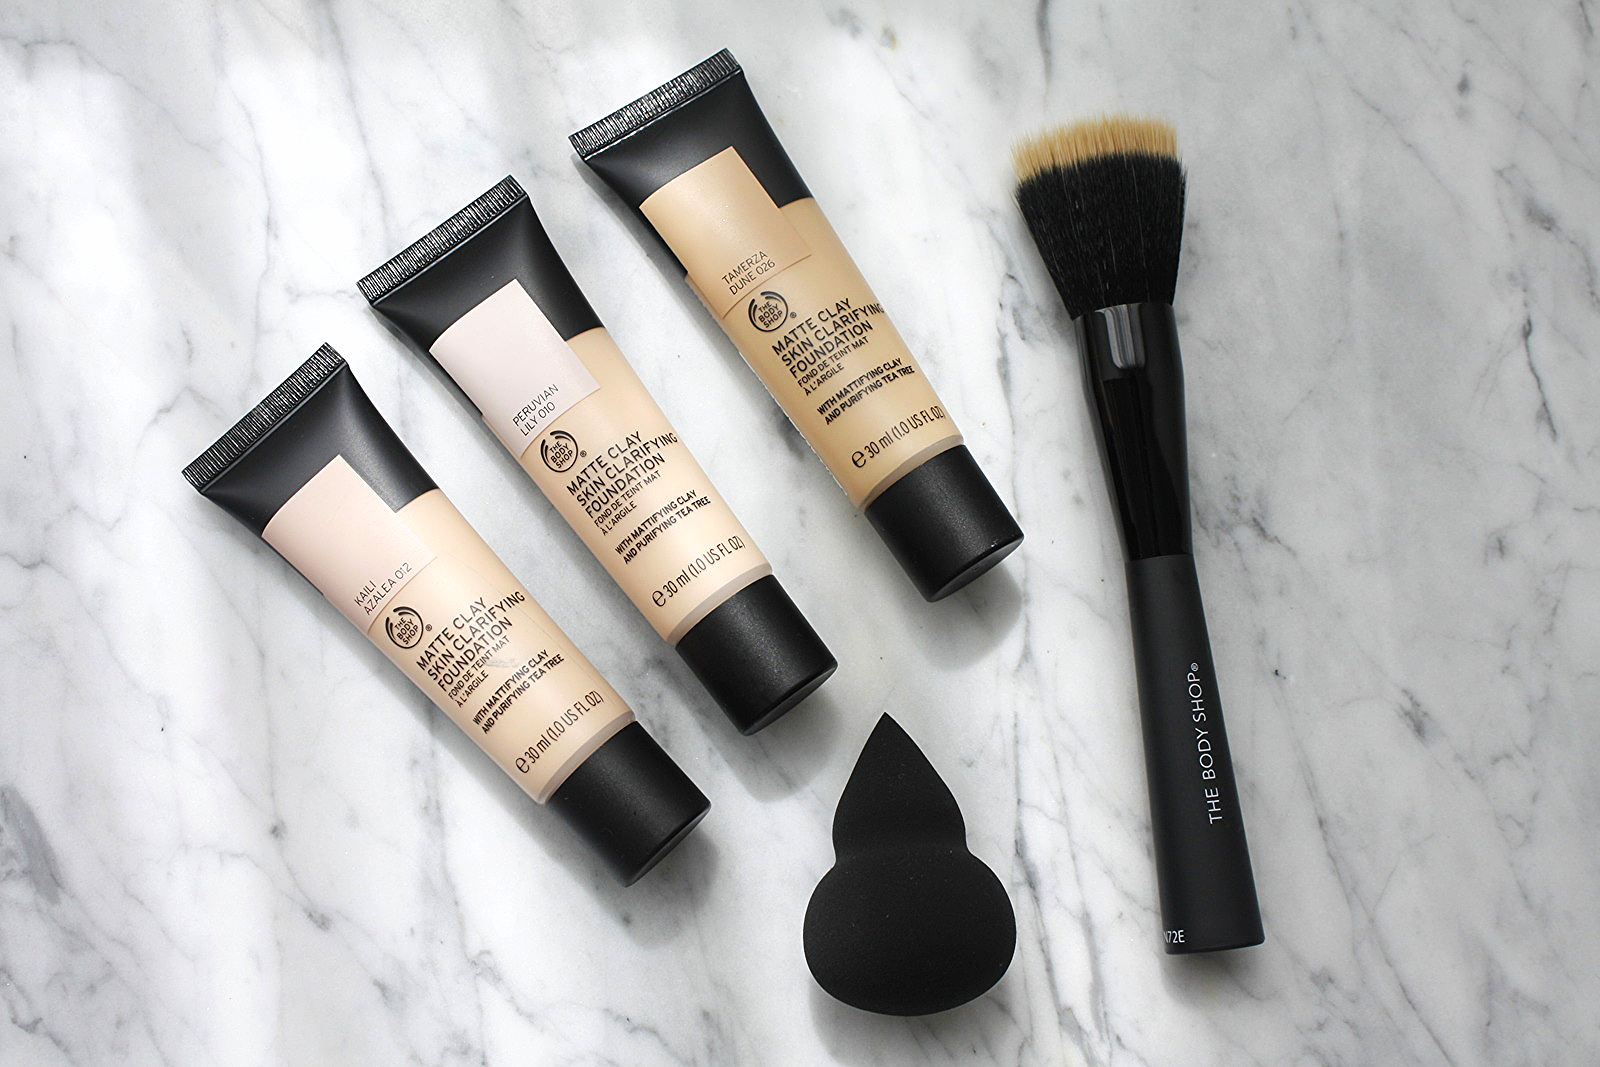 THE BODY SHOP MATTE CLAY FOUNDATION